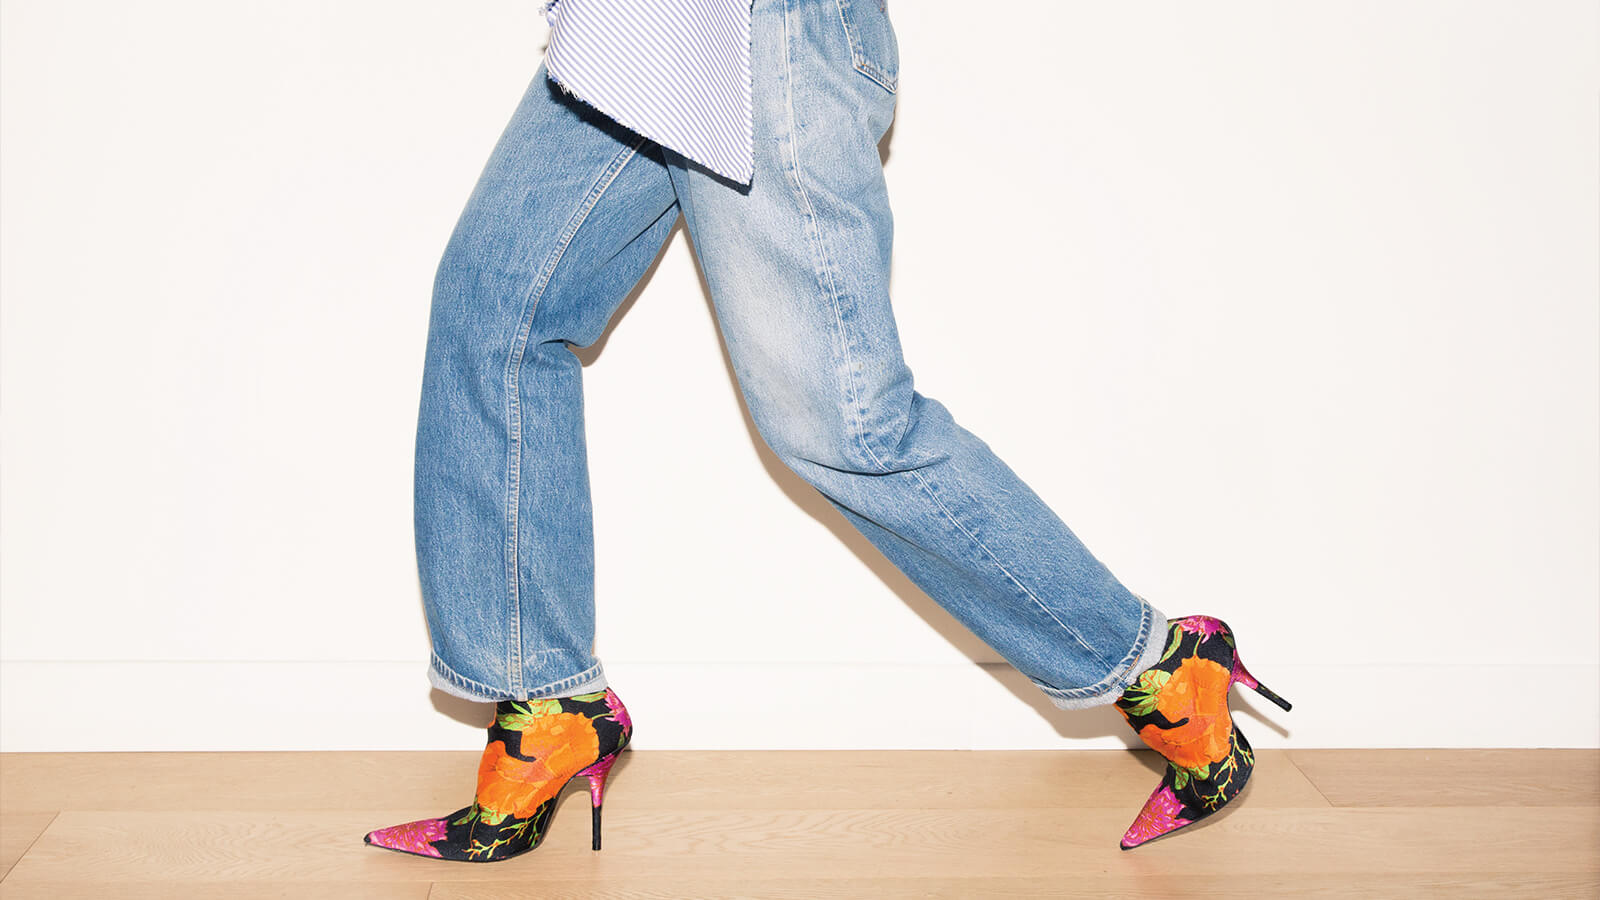 Image of person walking, wearing denim jeans and floral heeled boots